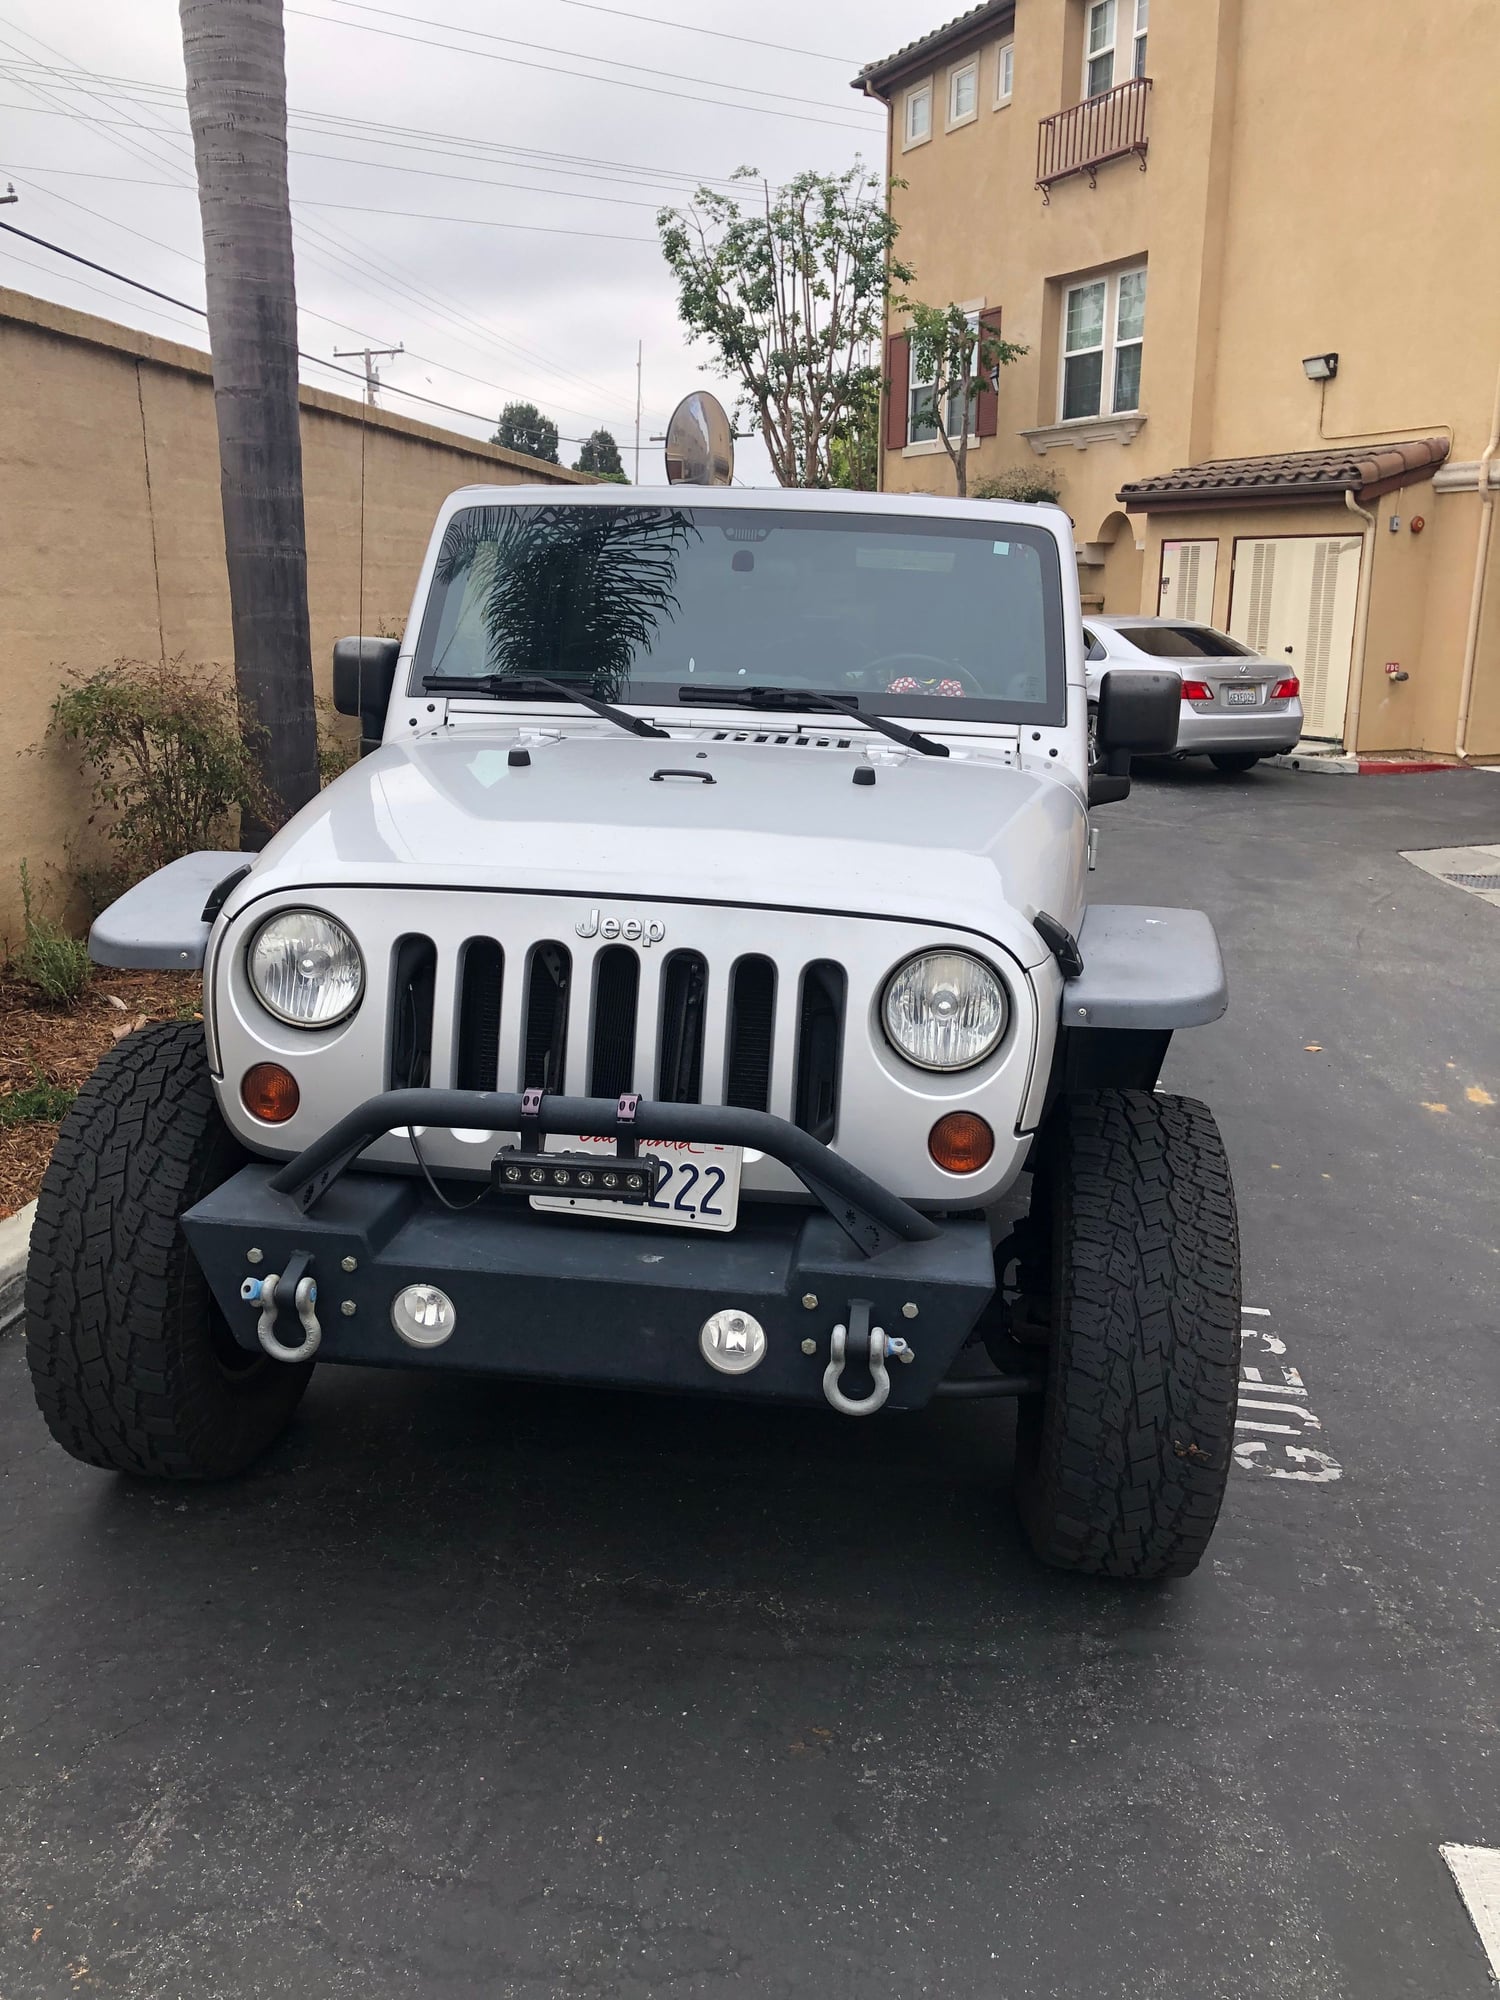 2011 Jeep Wrangler - 2011 JKU $11,000 - Used - VIN 1j4ha3h19bl523267 - 123,412 Miles - 6 cyl - 4WD - Automatic - SUV - Silver - Torrance, CA 90501, United States